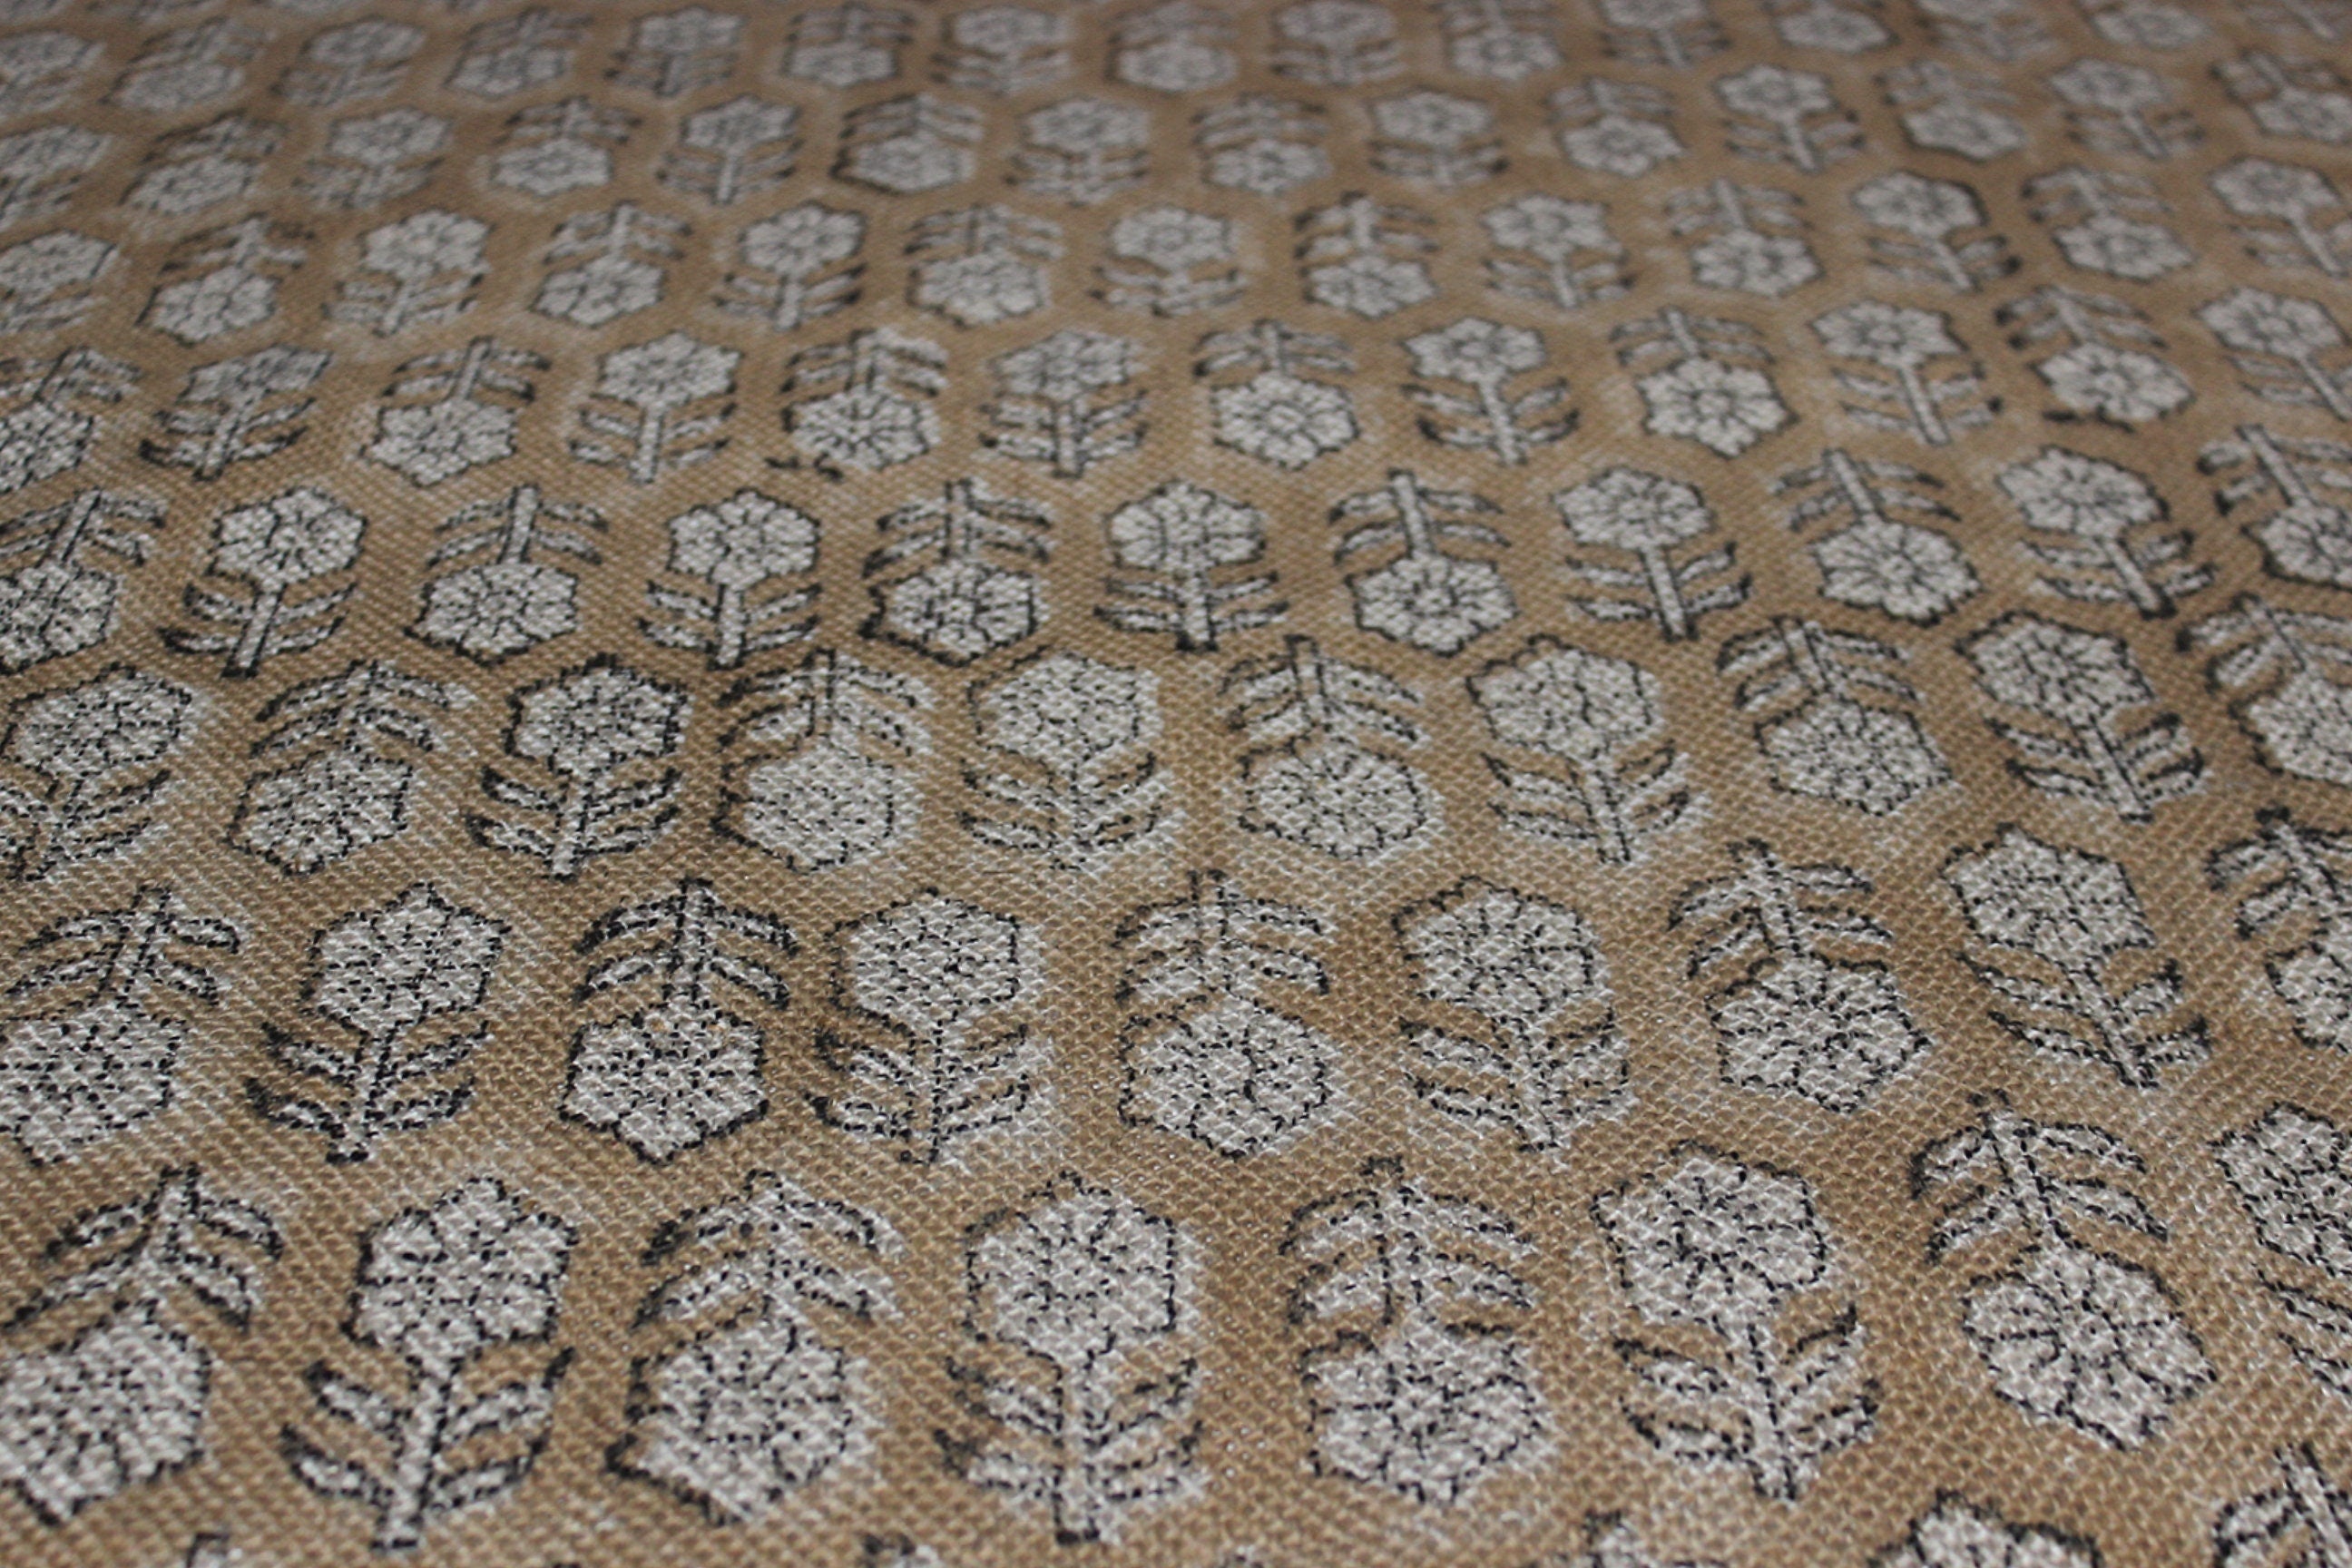 Block Print Linen Fabric, Tulsi Buti  Thick Linen India Block Print Fabric  Home Upholstery, Cushion Cover, Pillow Case  Organic, Natural, Handmade & Sustainable